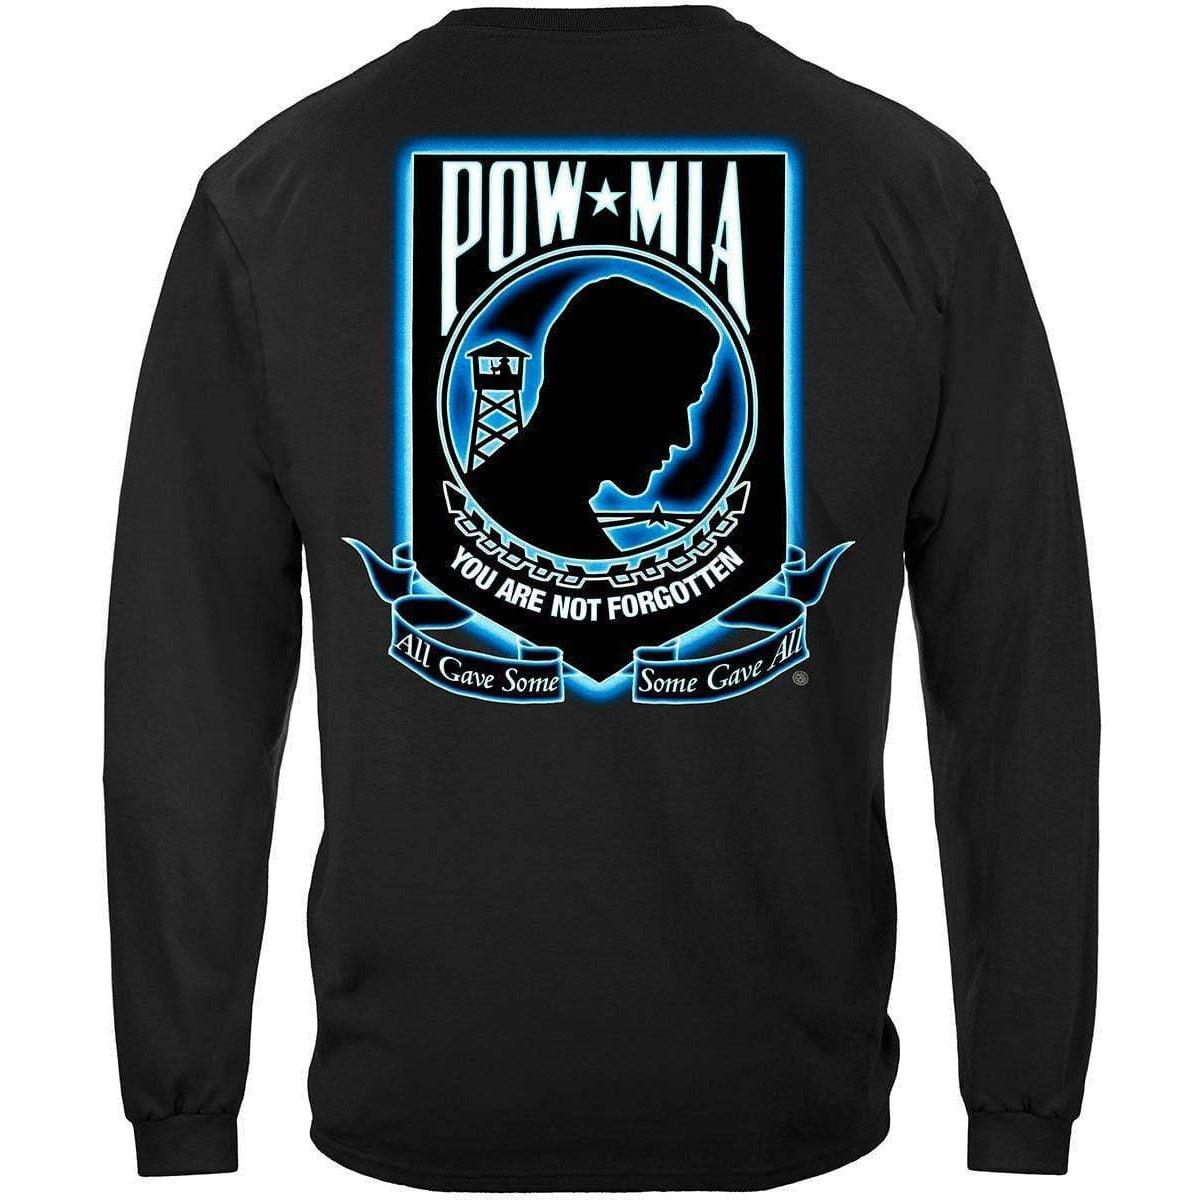 POW MIA - You Are  Not Forgotten - Some Gave All T-Shirt - Military Republic